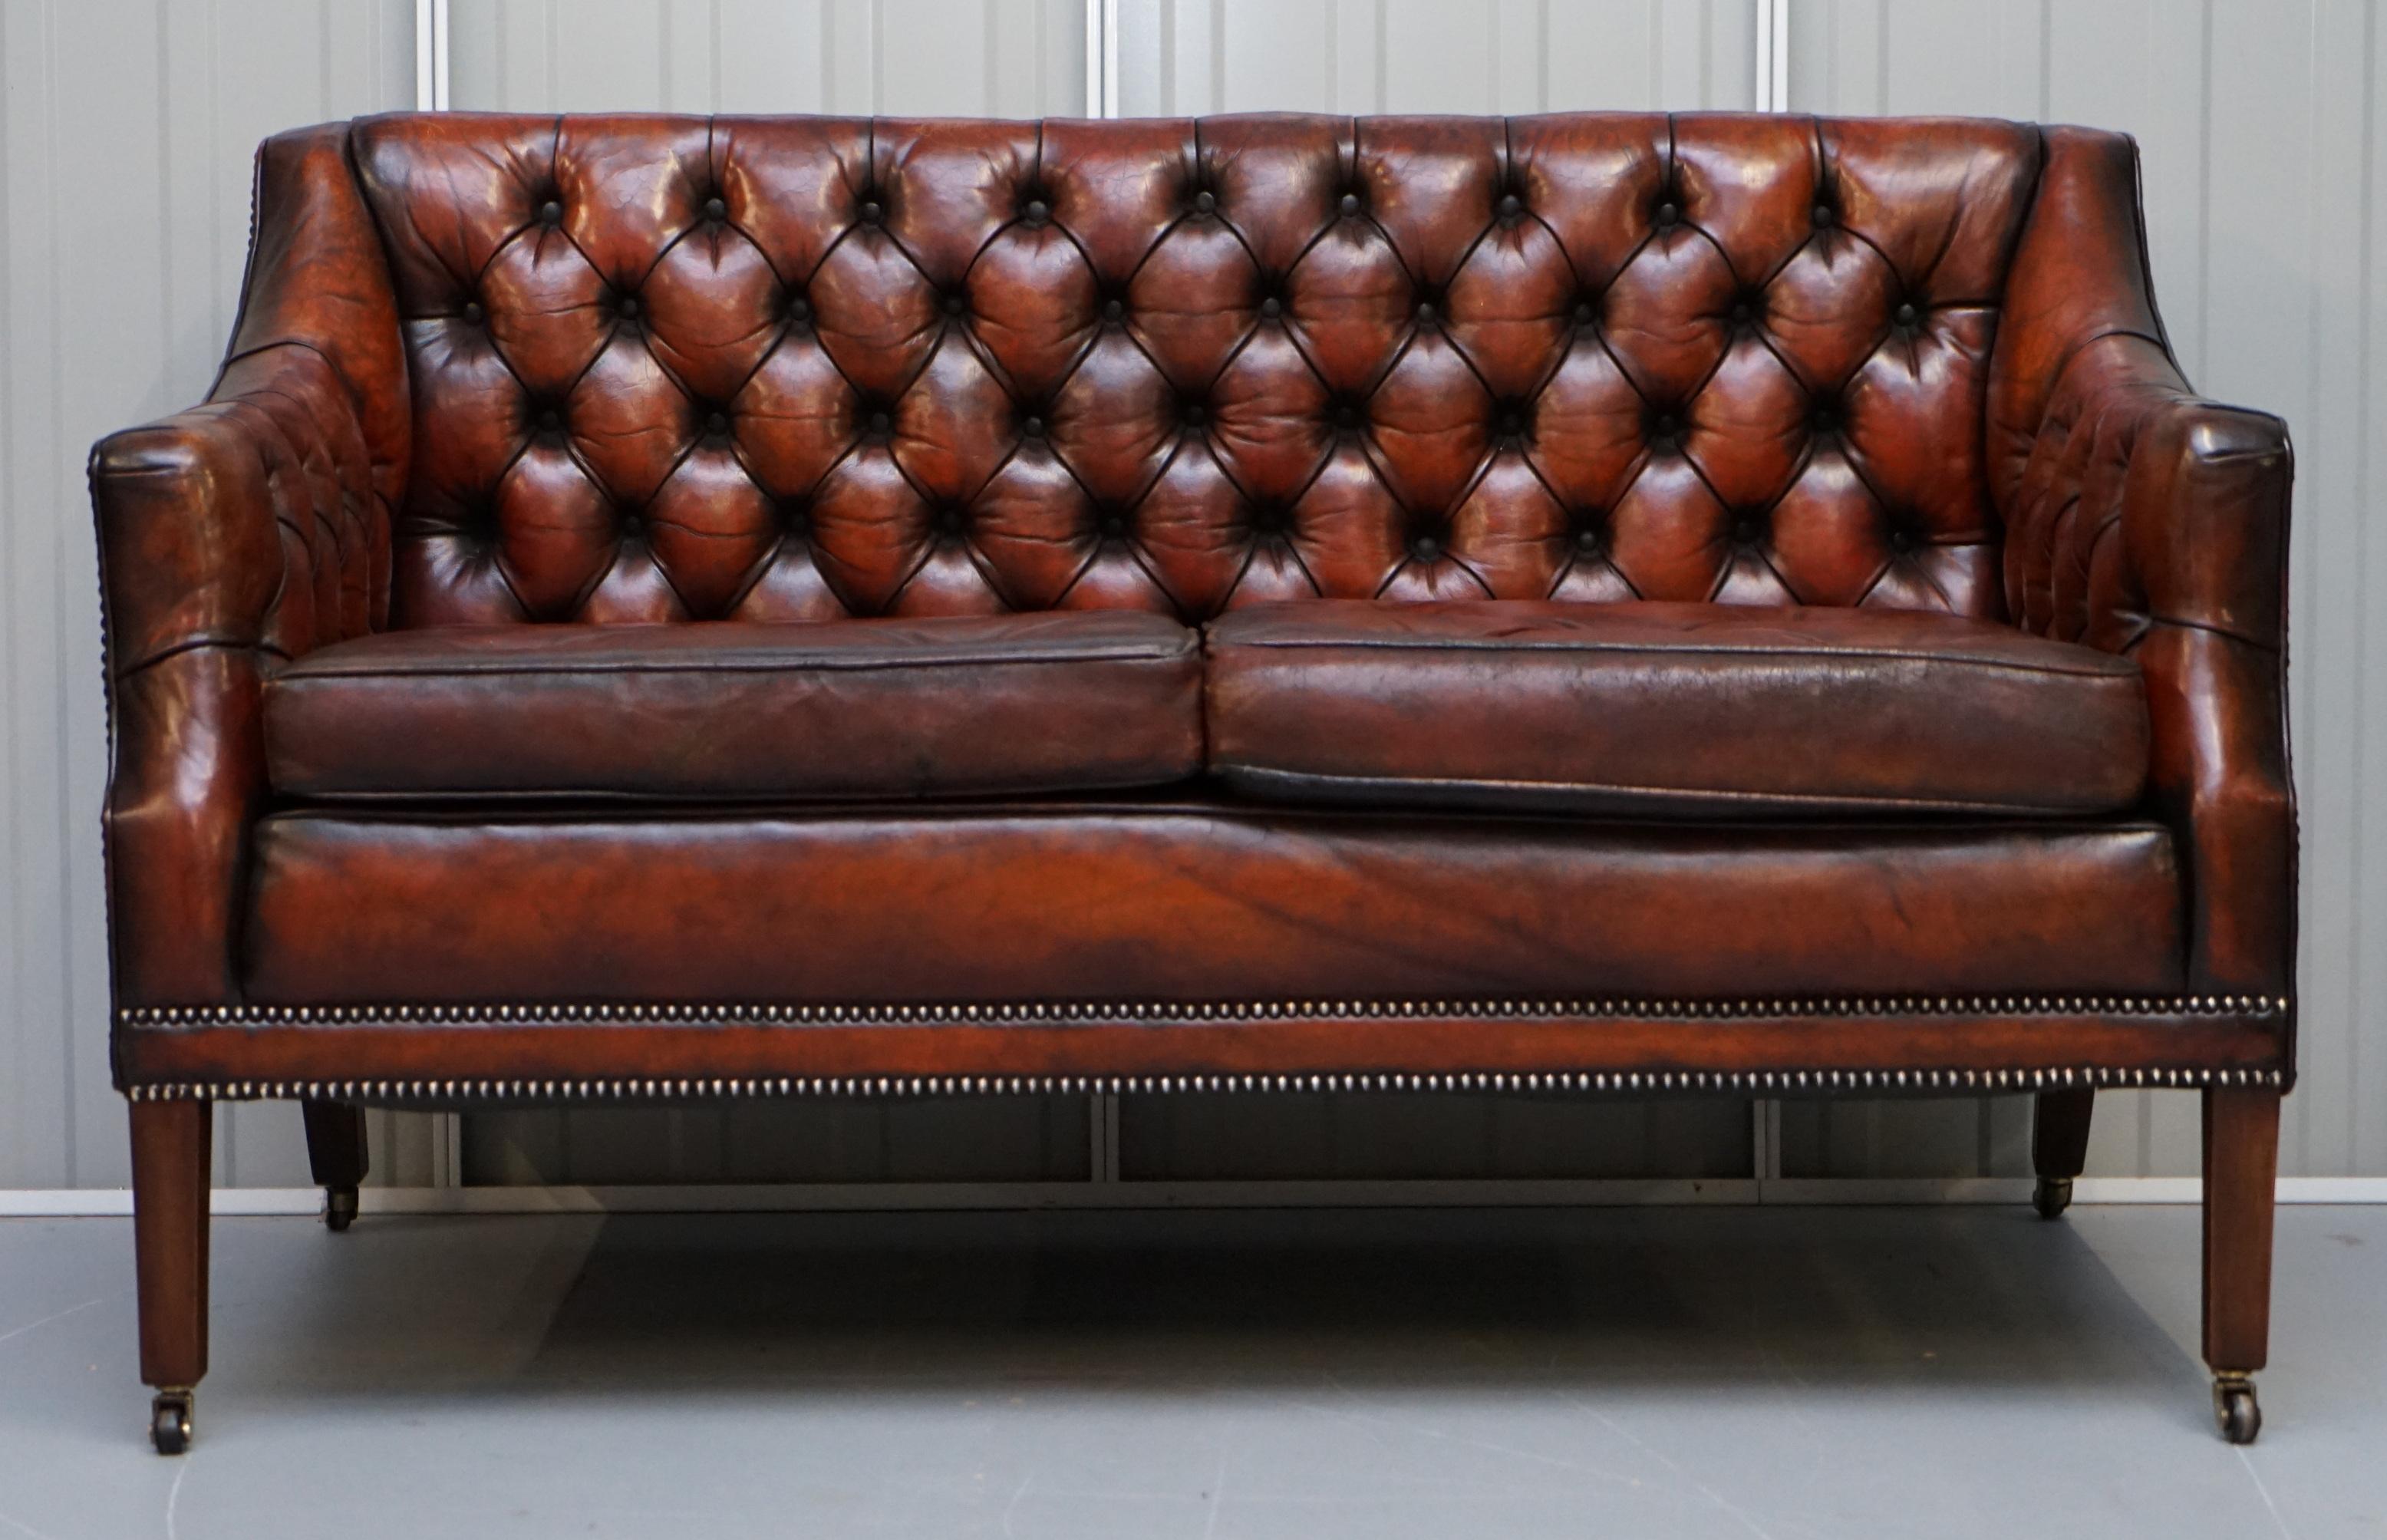 We are delighted to offer for sale this very rare fully restored Whisky brown leather Lutyen’s Viceroy style two seat brown leather sofa with Thomas Chippendale style floating button cushions 

A very good looking and rare sofa, the style comes